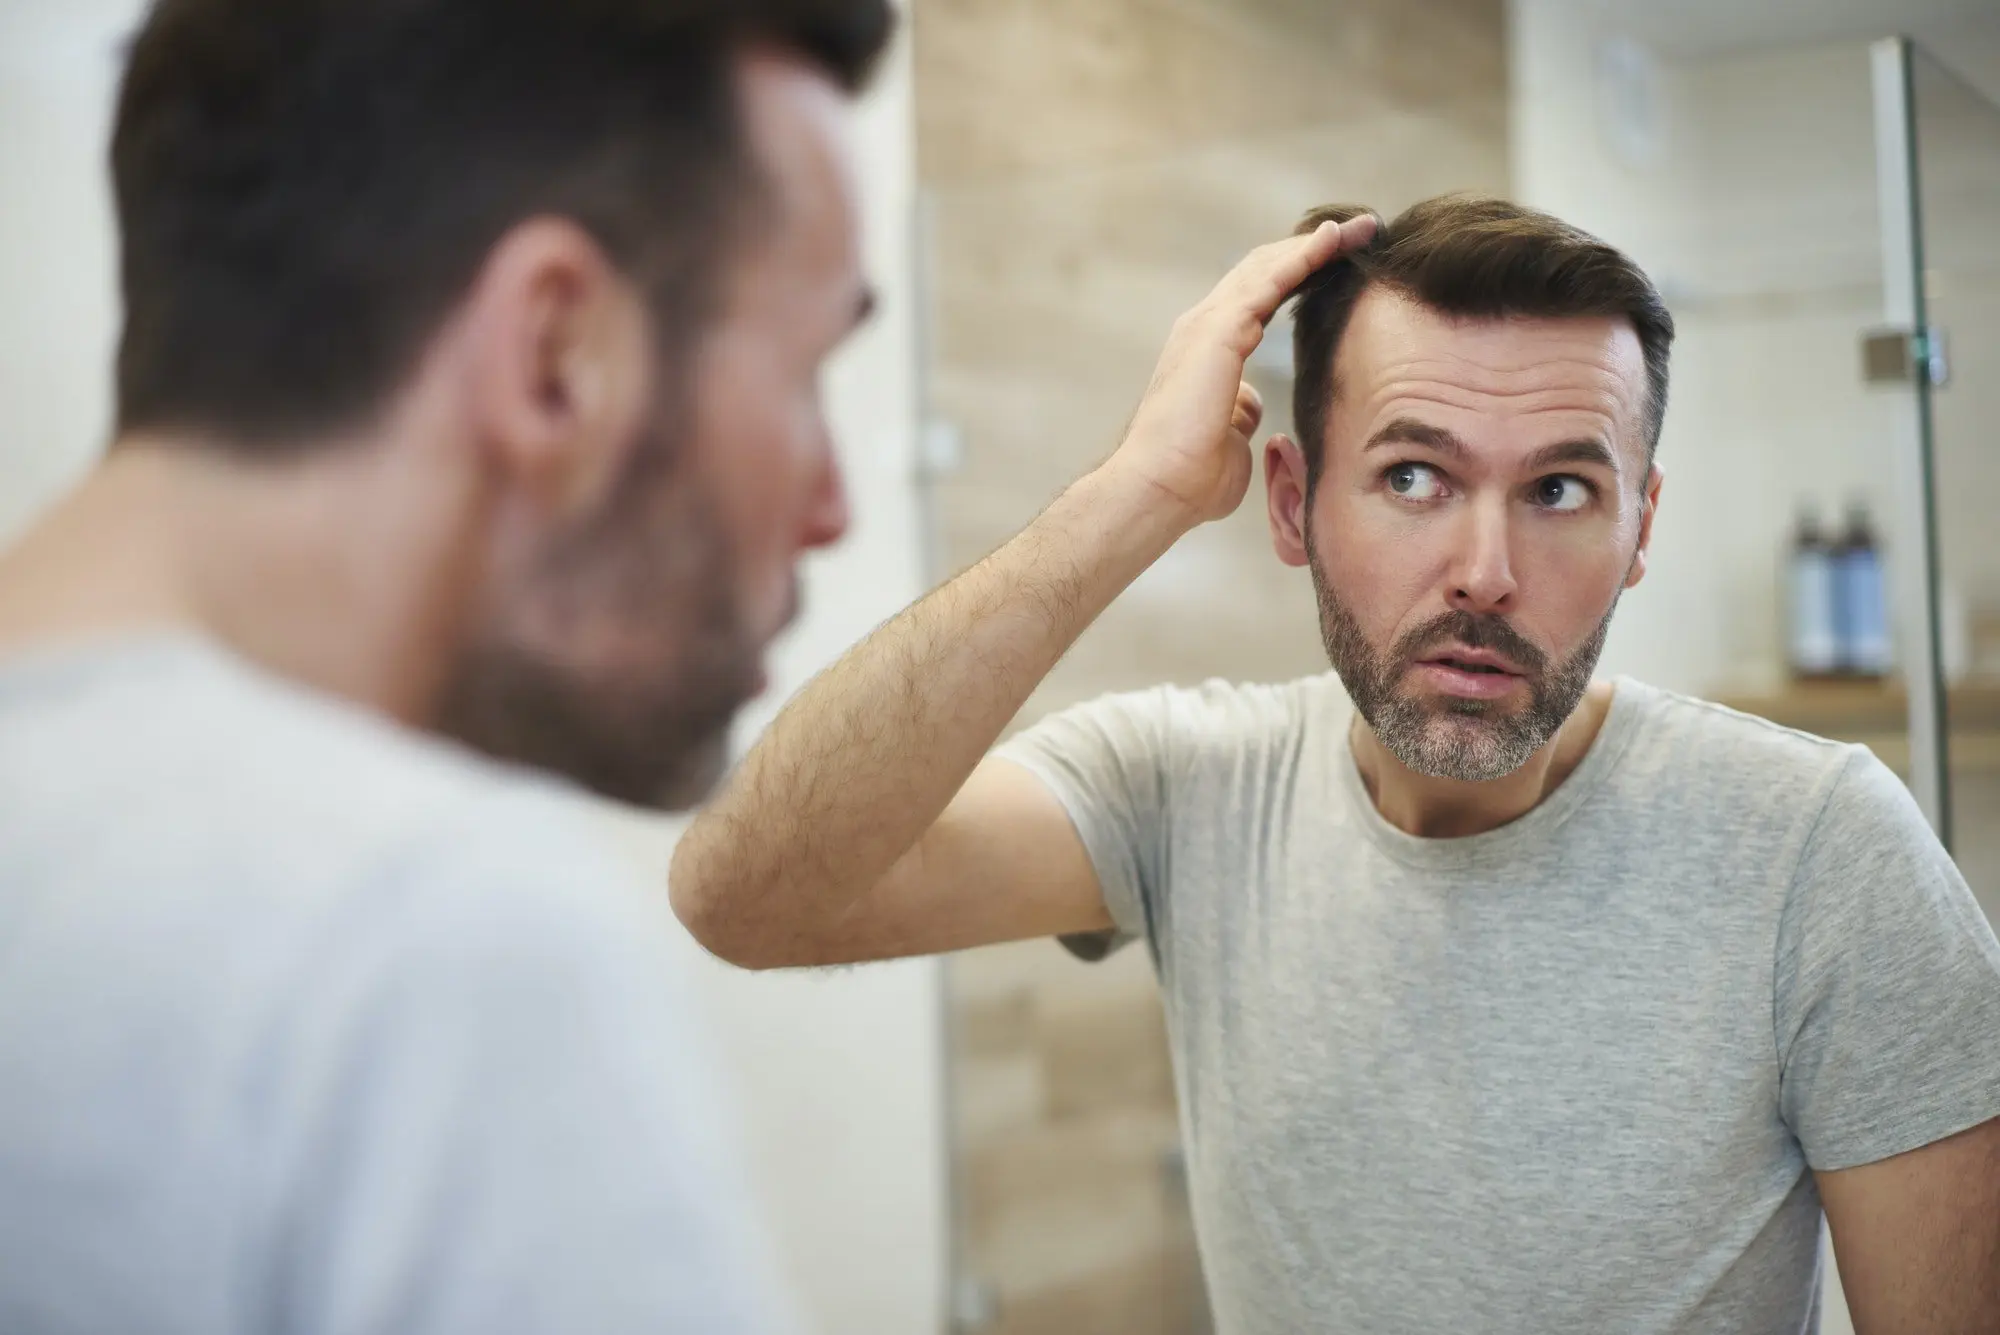 The most common types of hair loss